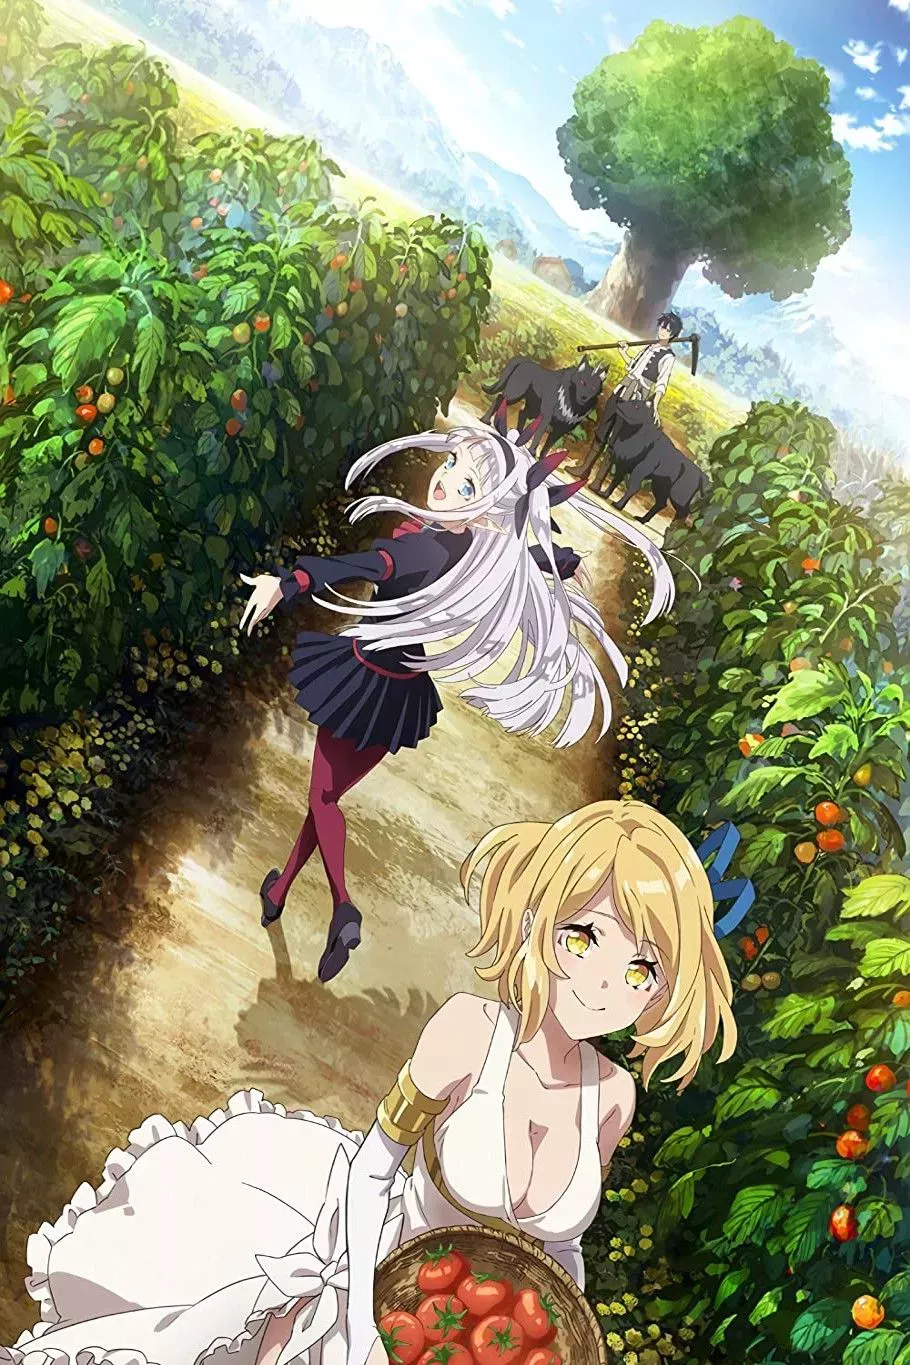 Farming life in another world poster